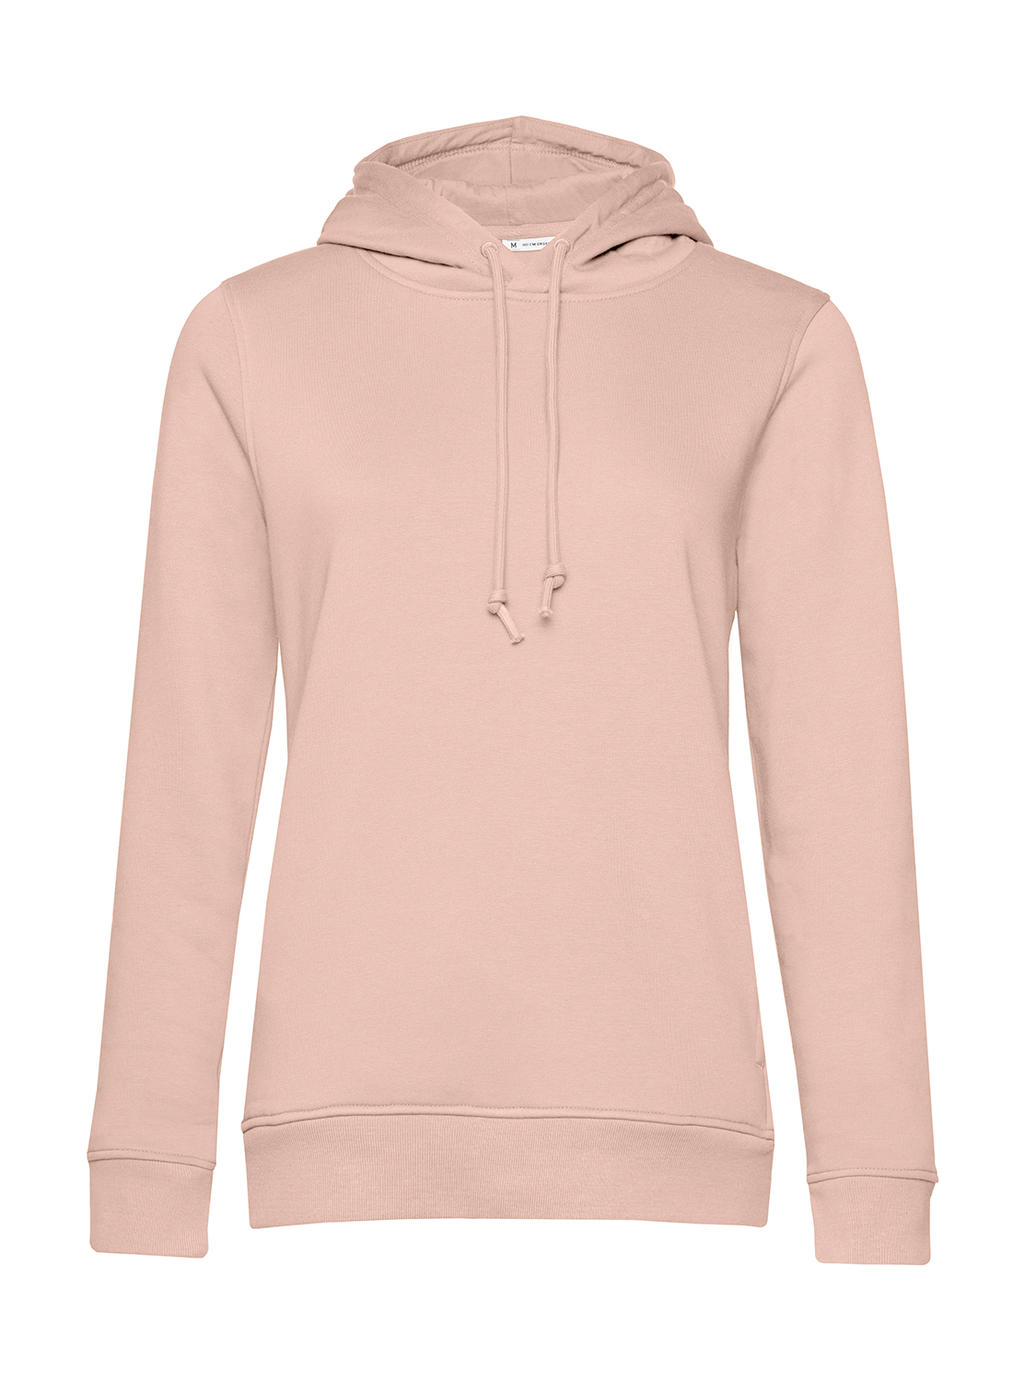  Organic Inspire Hooded /women_? in Farbe Soft Rose